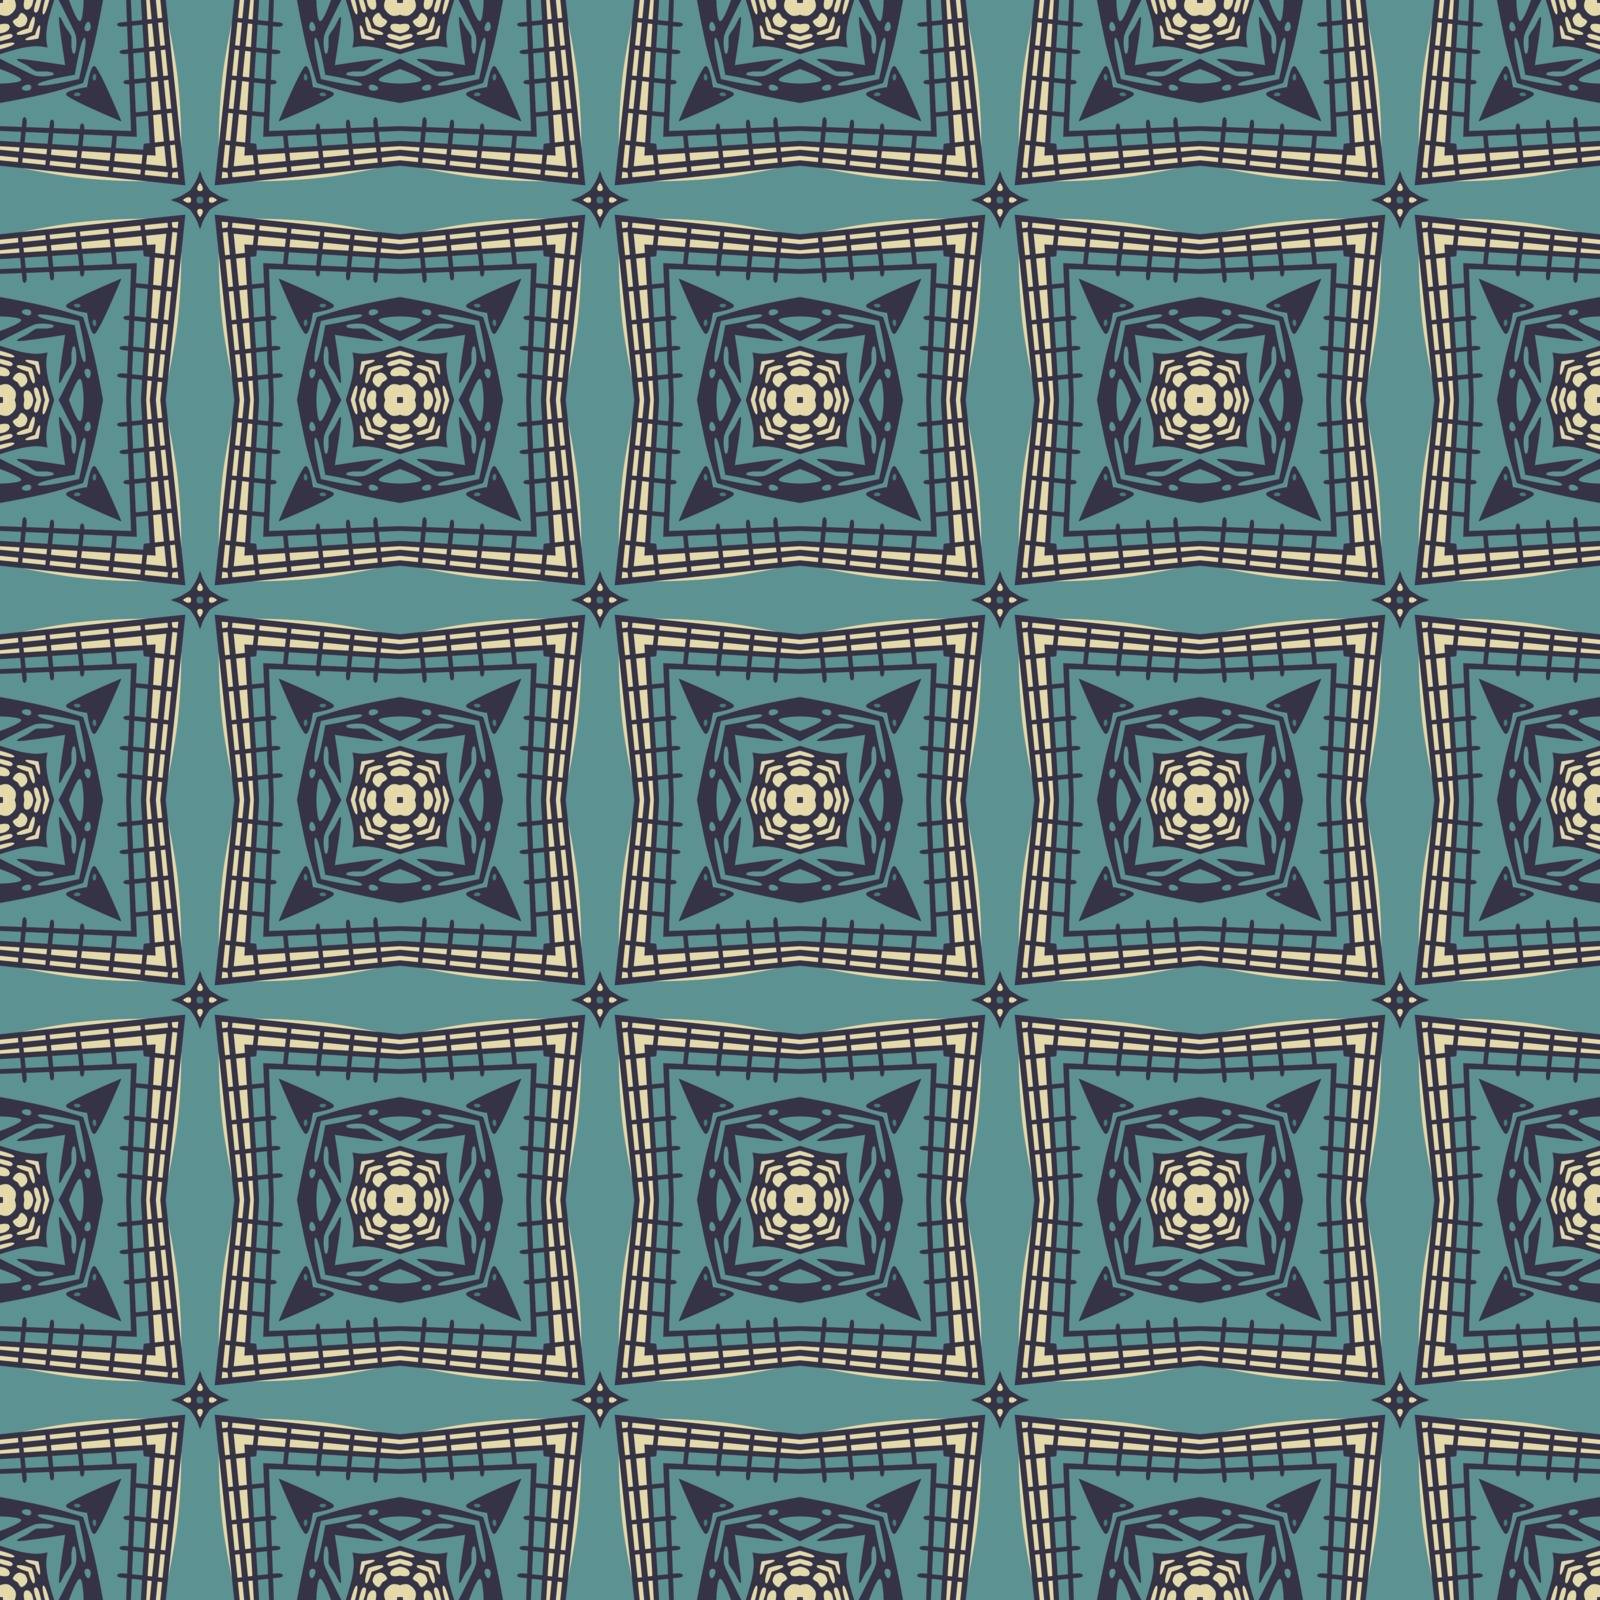 Seamless illustrated pattern made of abstract elements in beige, turquoise  and black